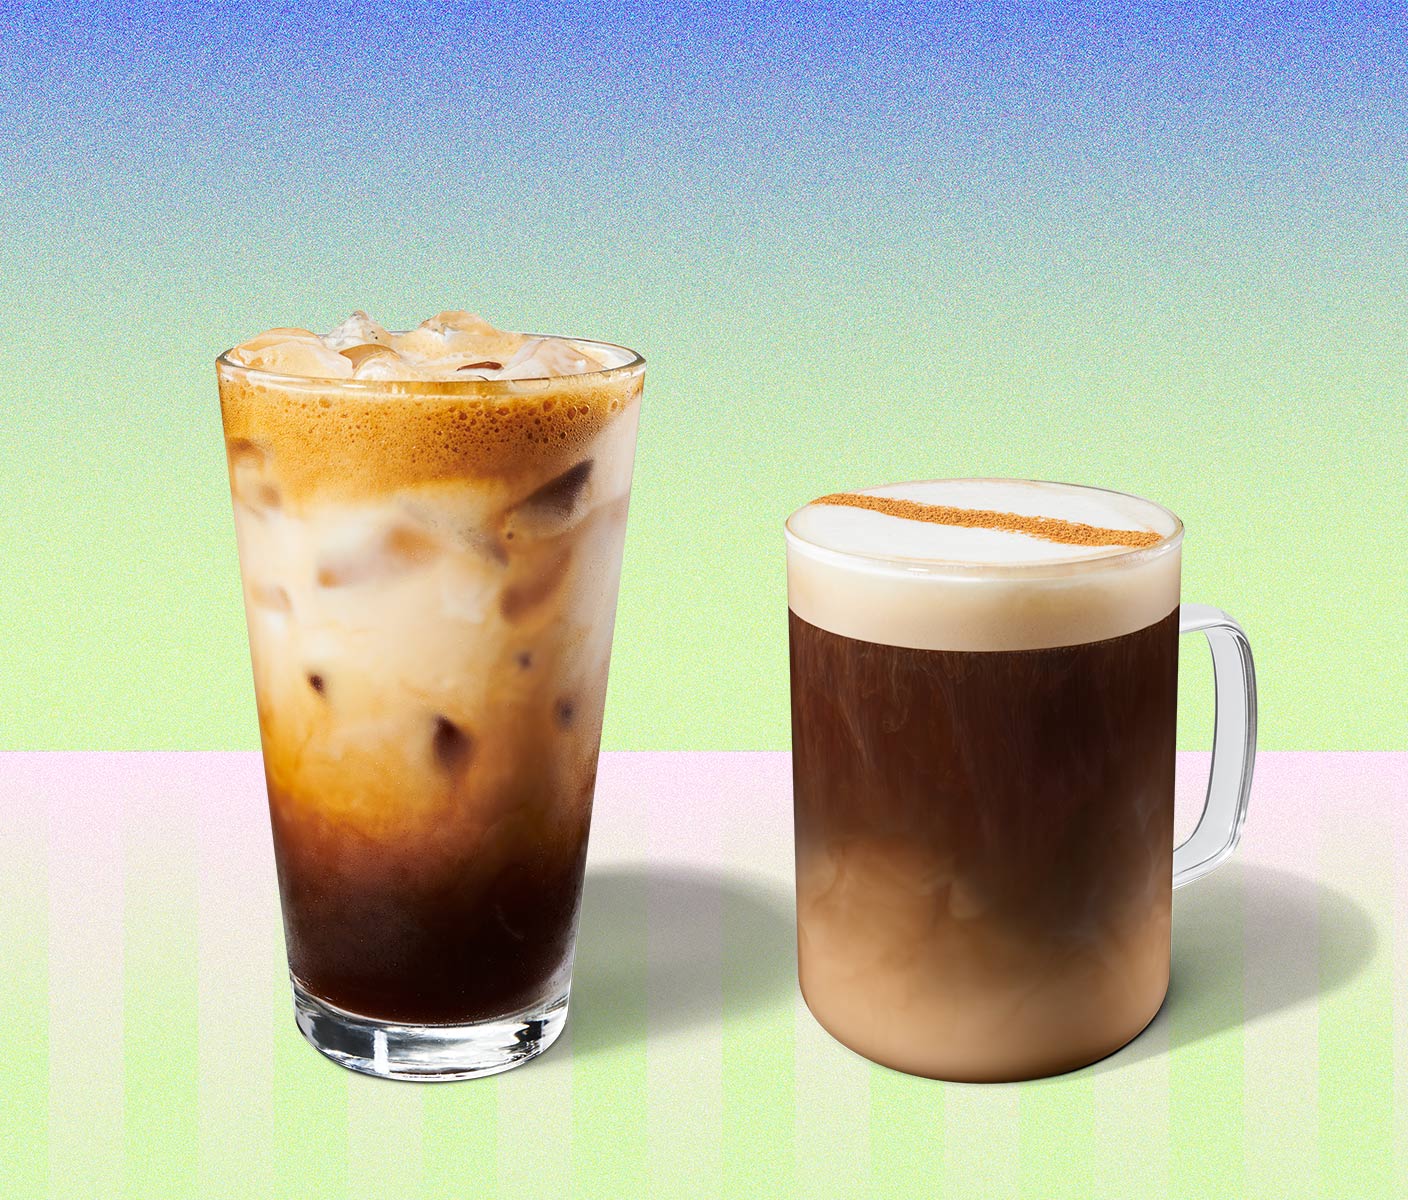 Marbled, iced coffee drink in a tall glass next to a hot coffee drink in a glass mug.